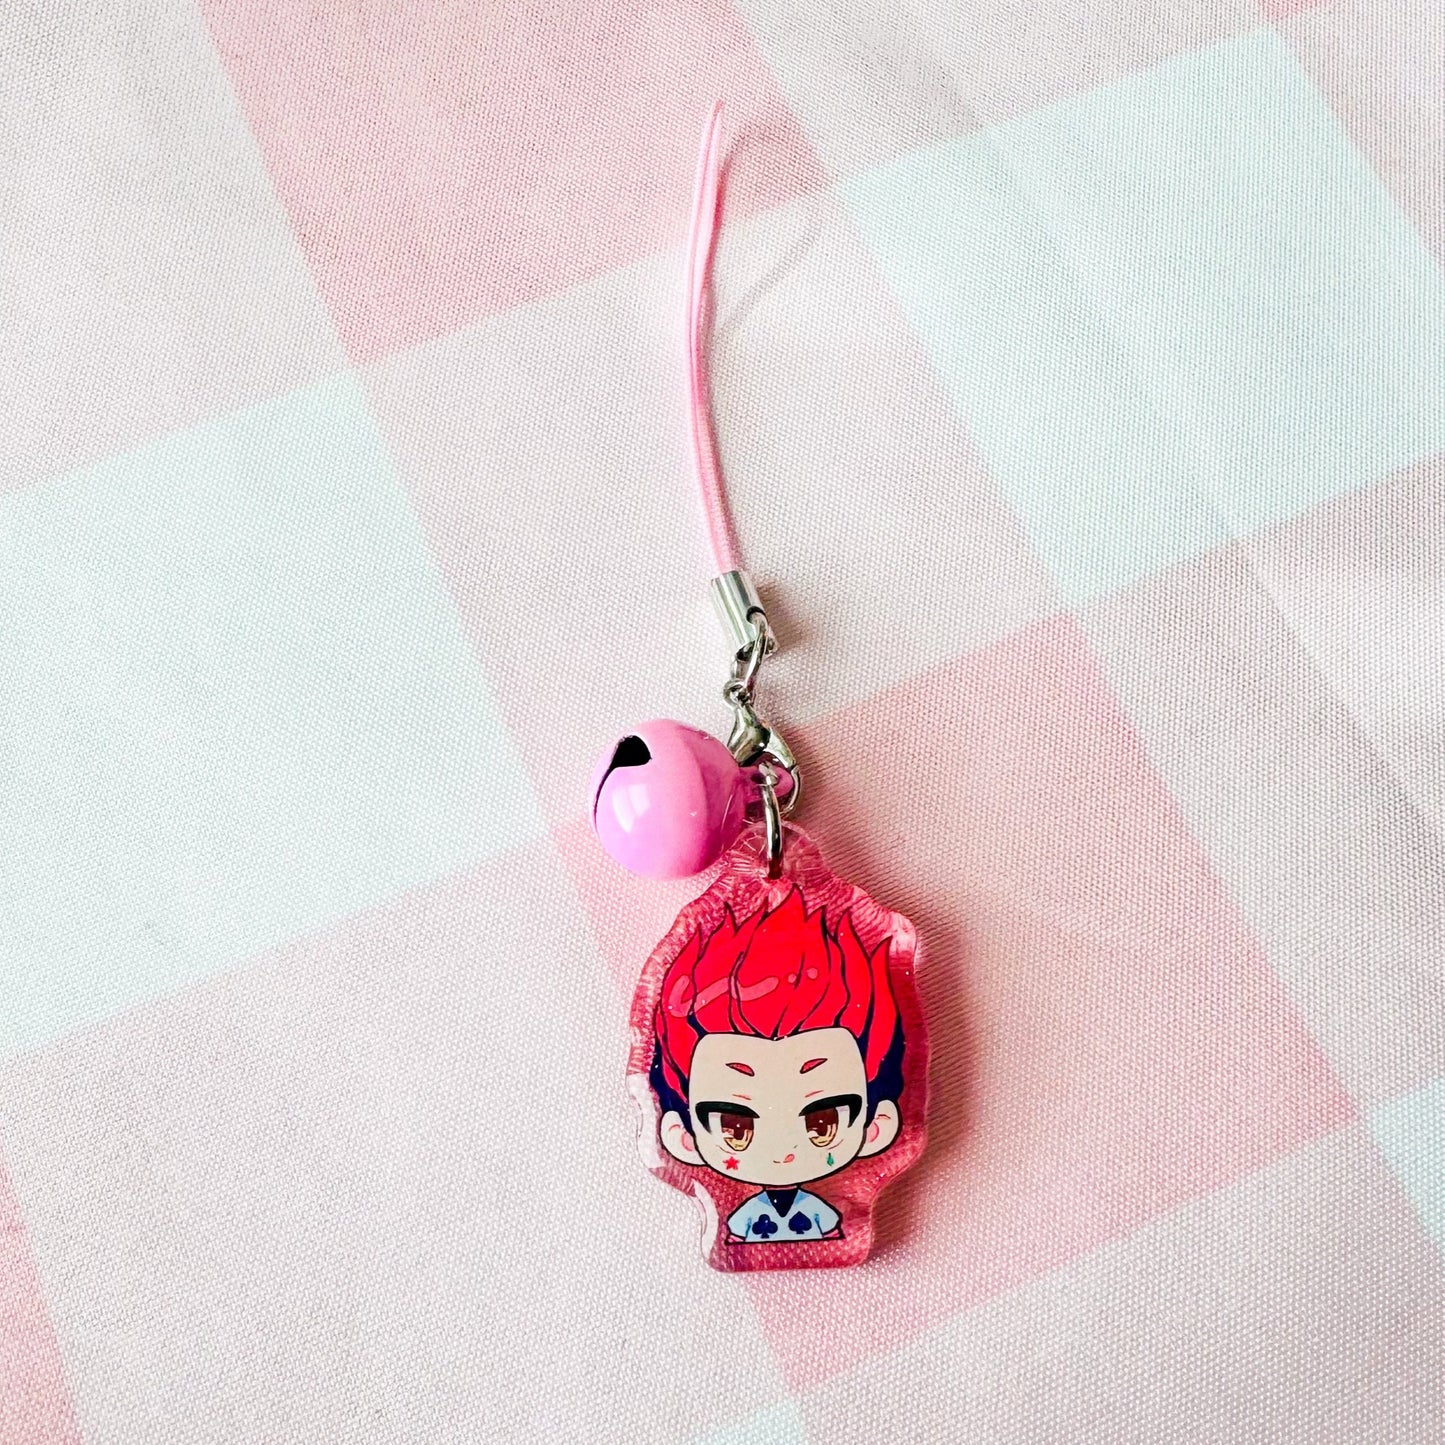 H☆H Phone Charms